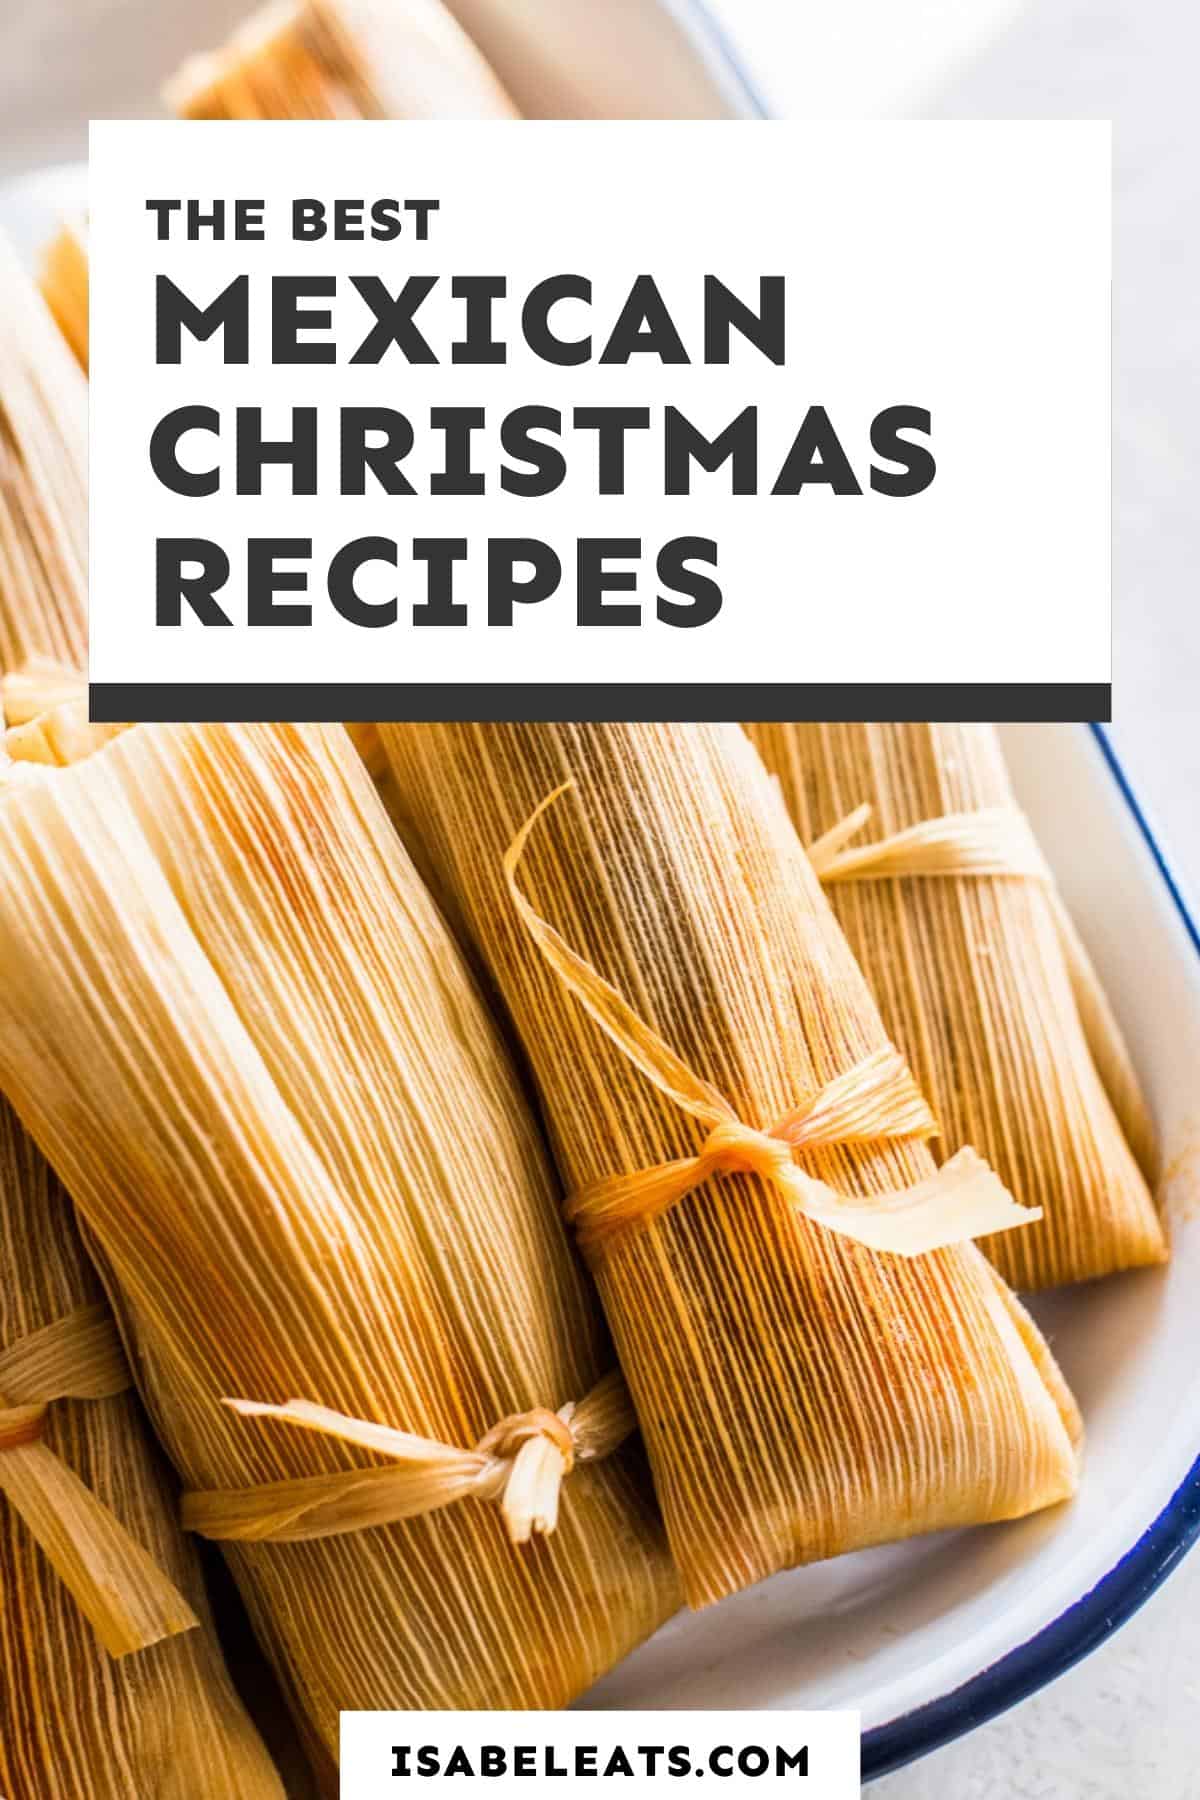 16 Mexican Christmas Recipes to Make This Year | Mexican Christmas Foods